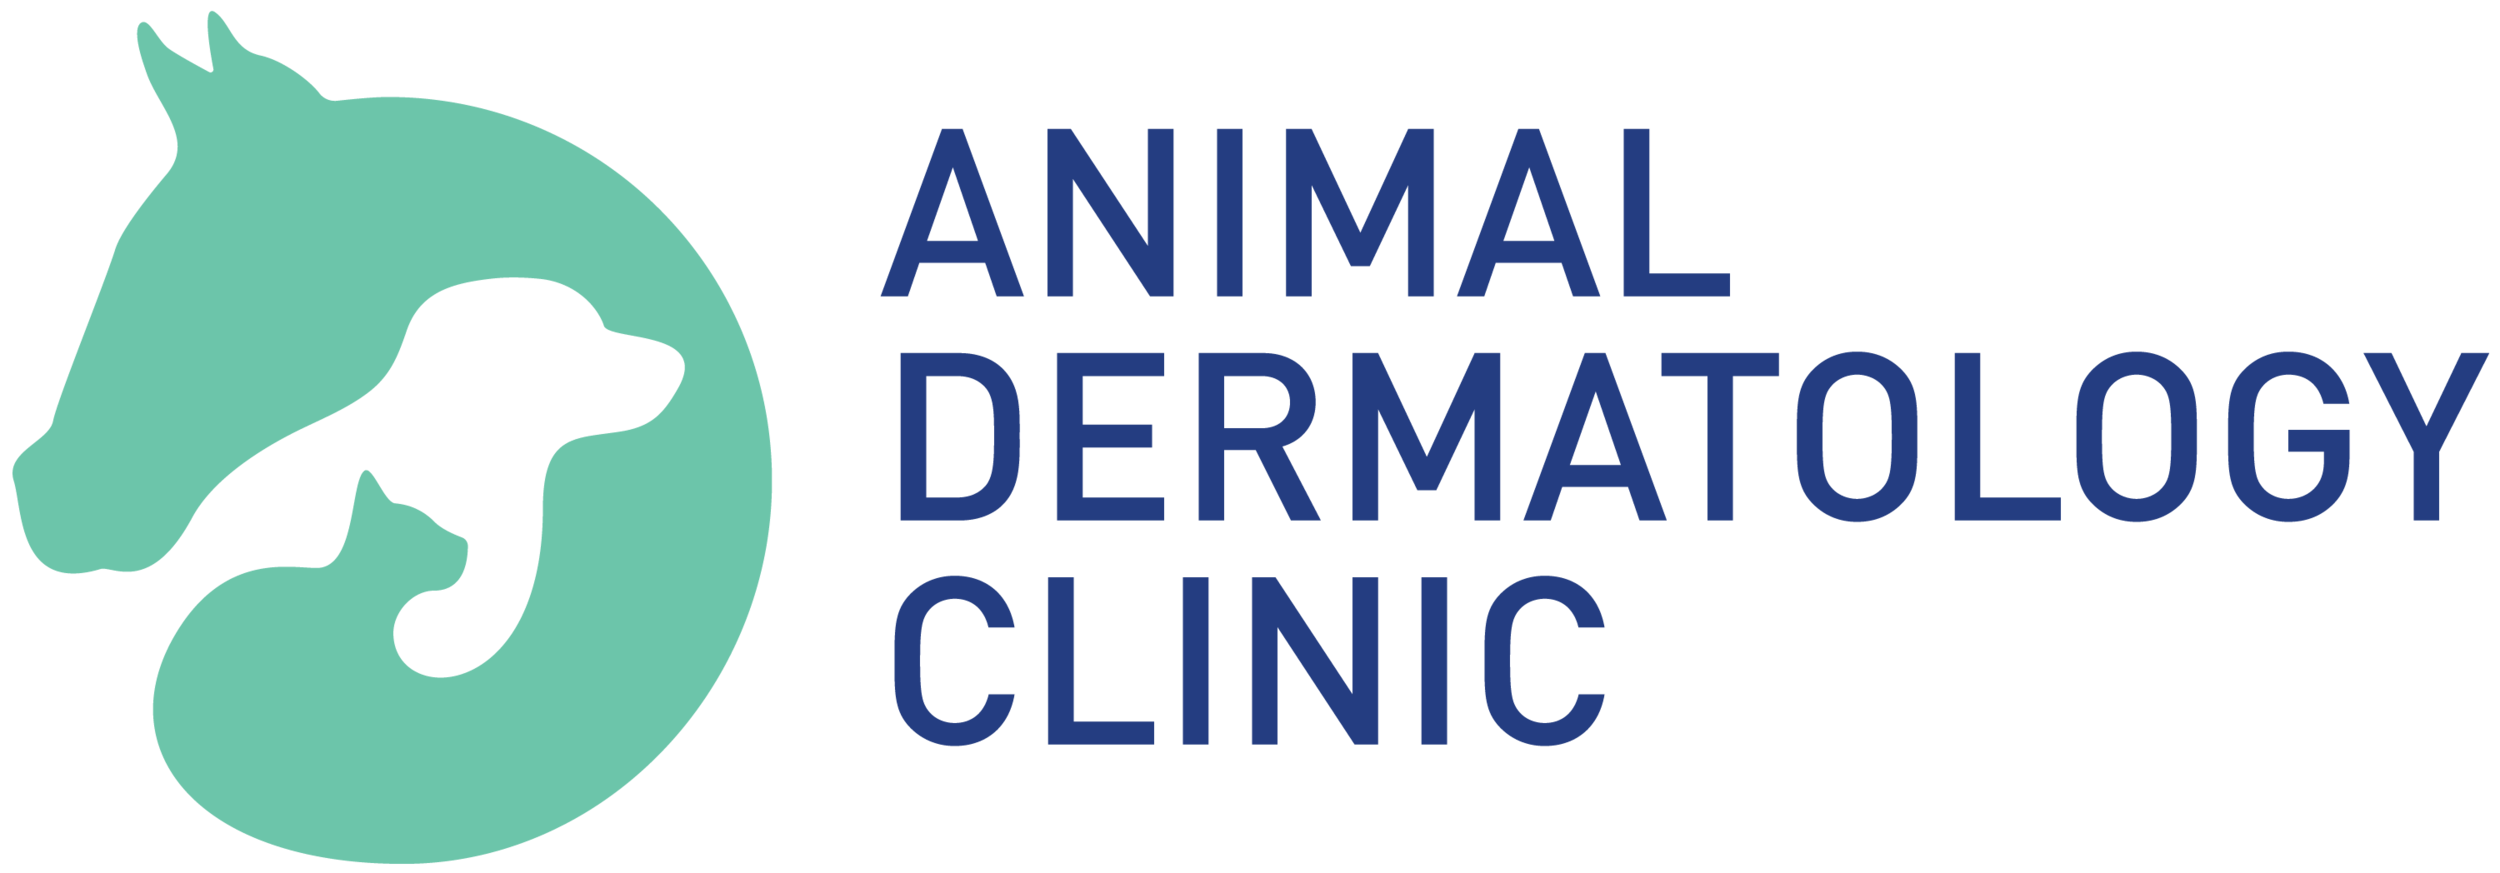 Animal Dermatology Clinic | Your Dermatology and Ear Specialists